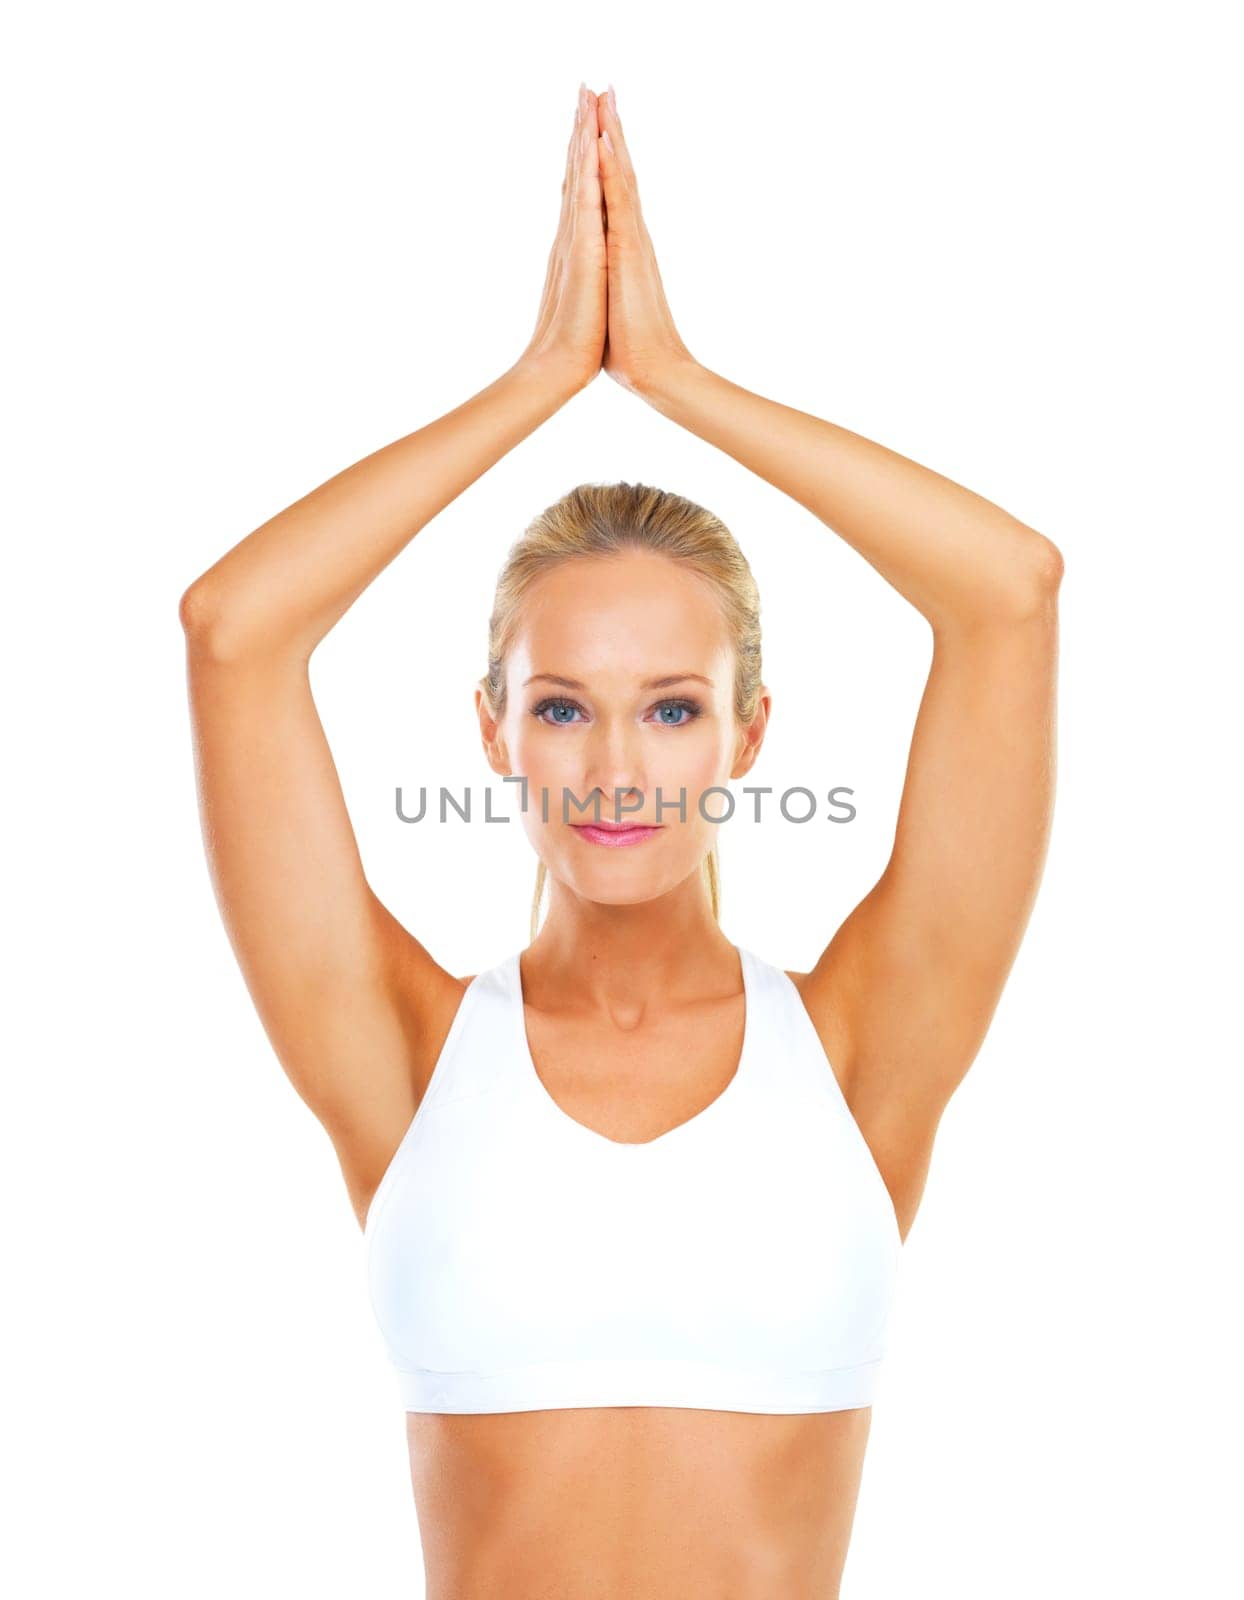 Yoga, relax and portrait of woman in studio for stress relief, wellness and mindfulness in calm meditation. Prayer hands, peace and zen person on white background for spiritual healing, mental health.